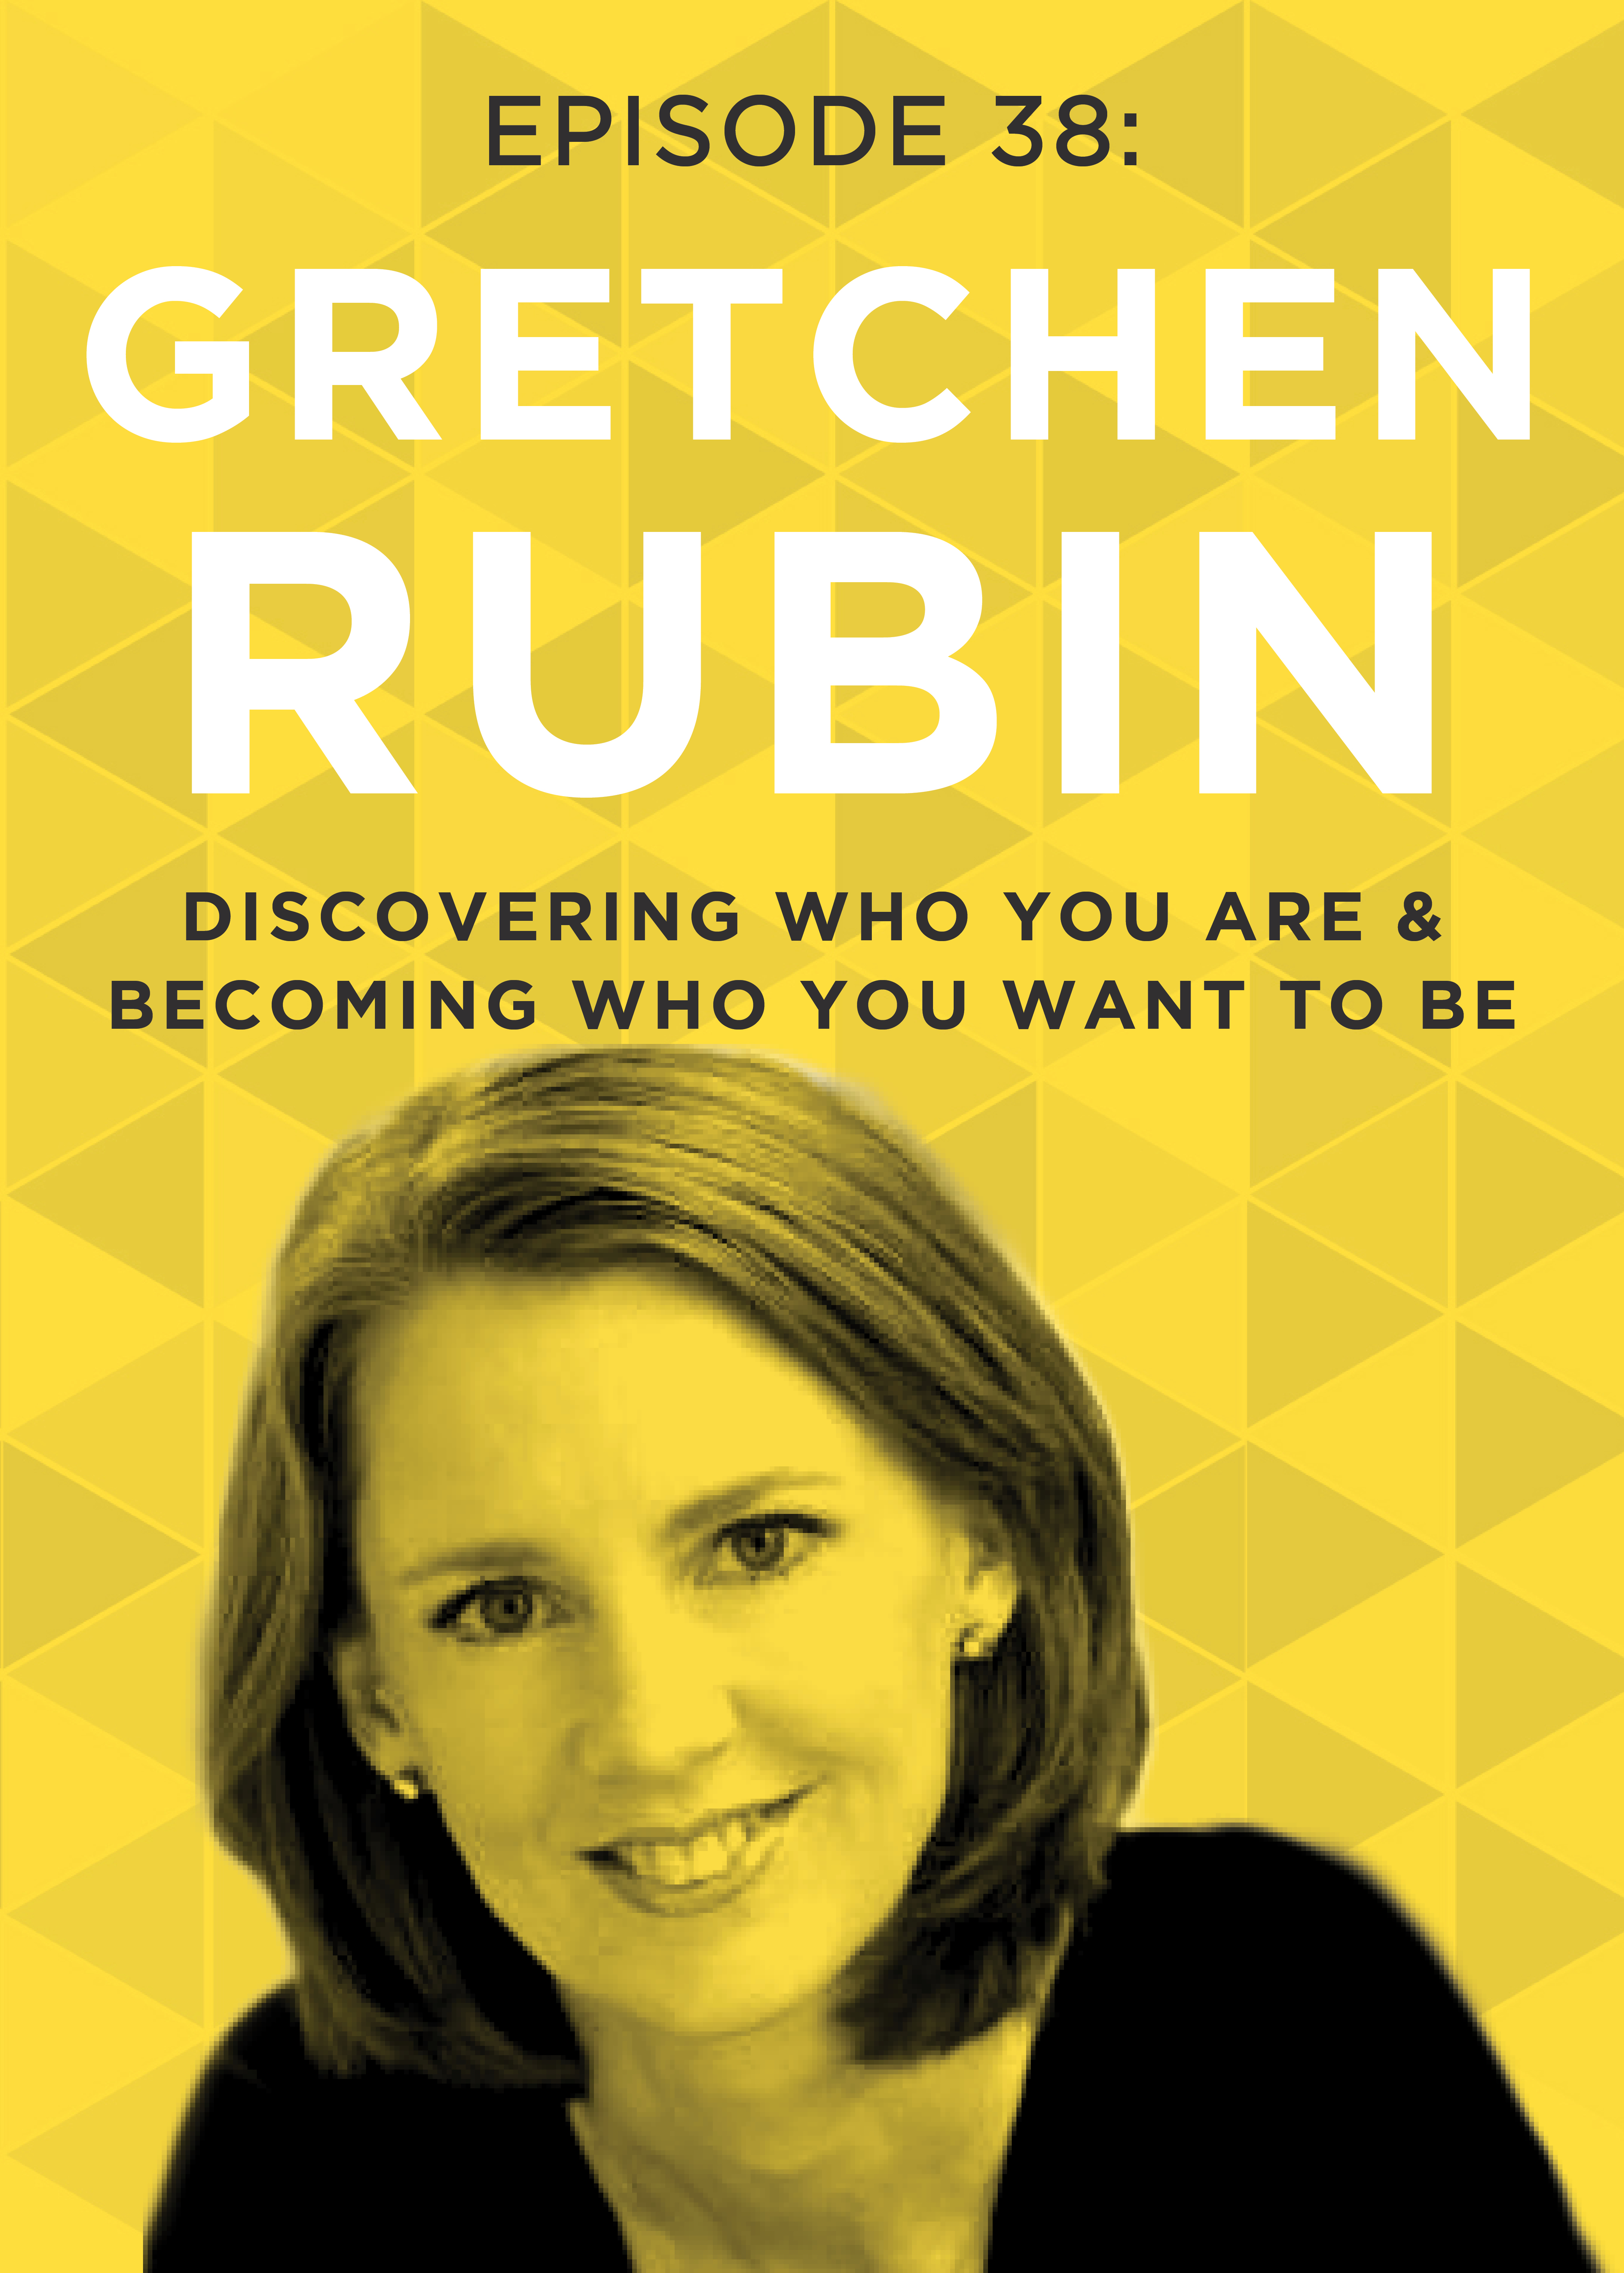 EP 38: Discovering Who You Are & Becoming Who You Want to Be with Gretchen Rubin